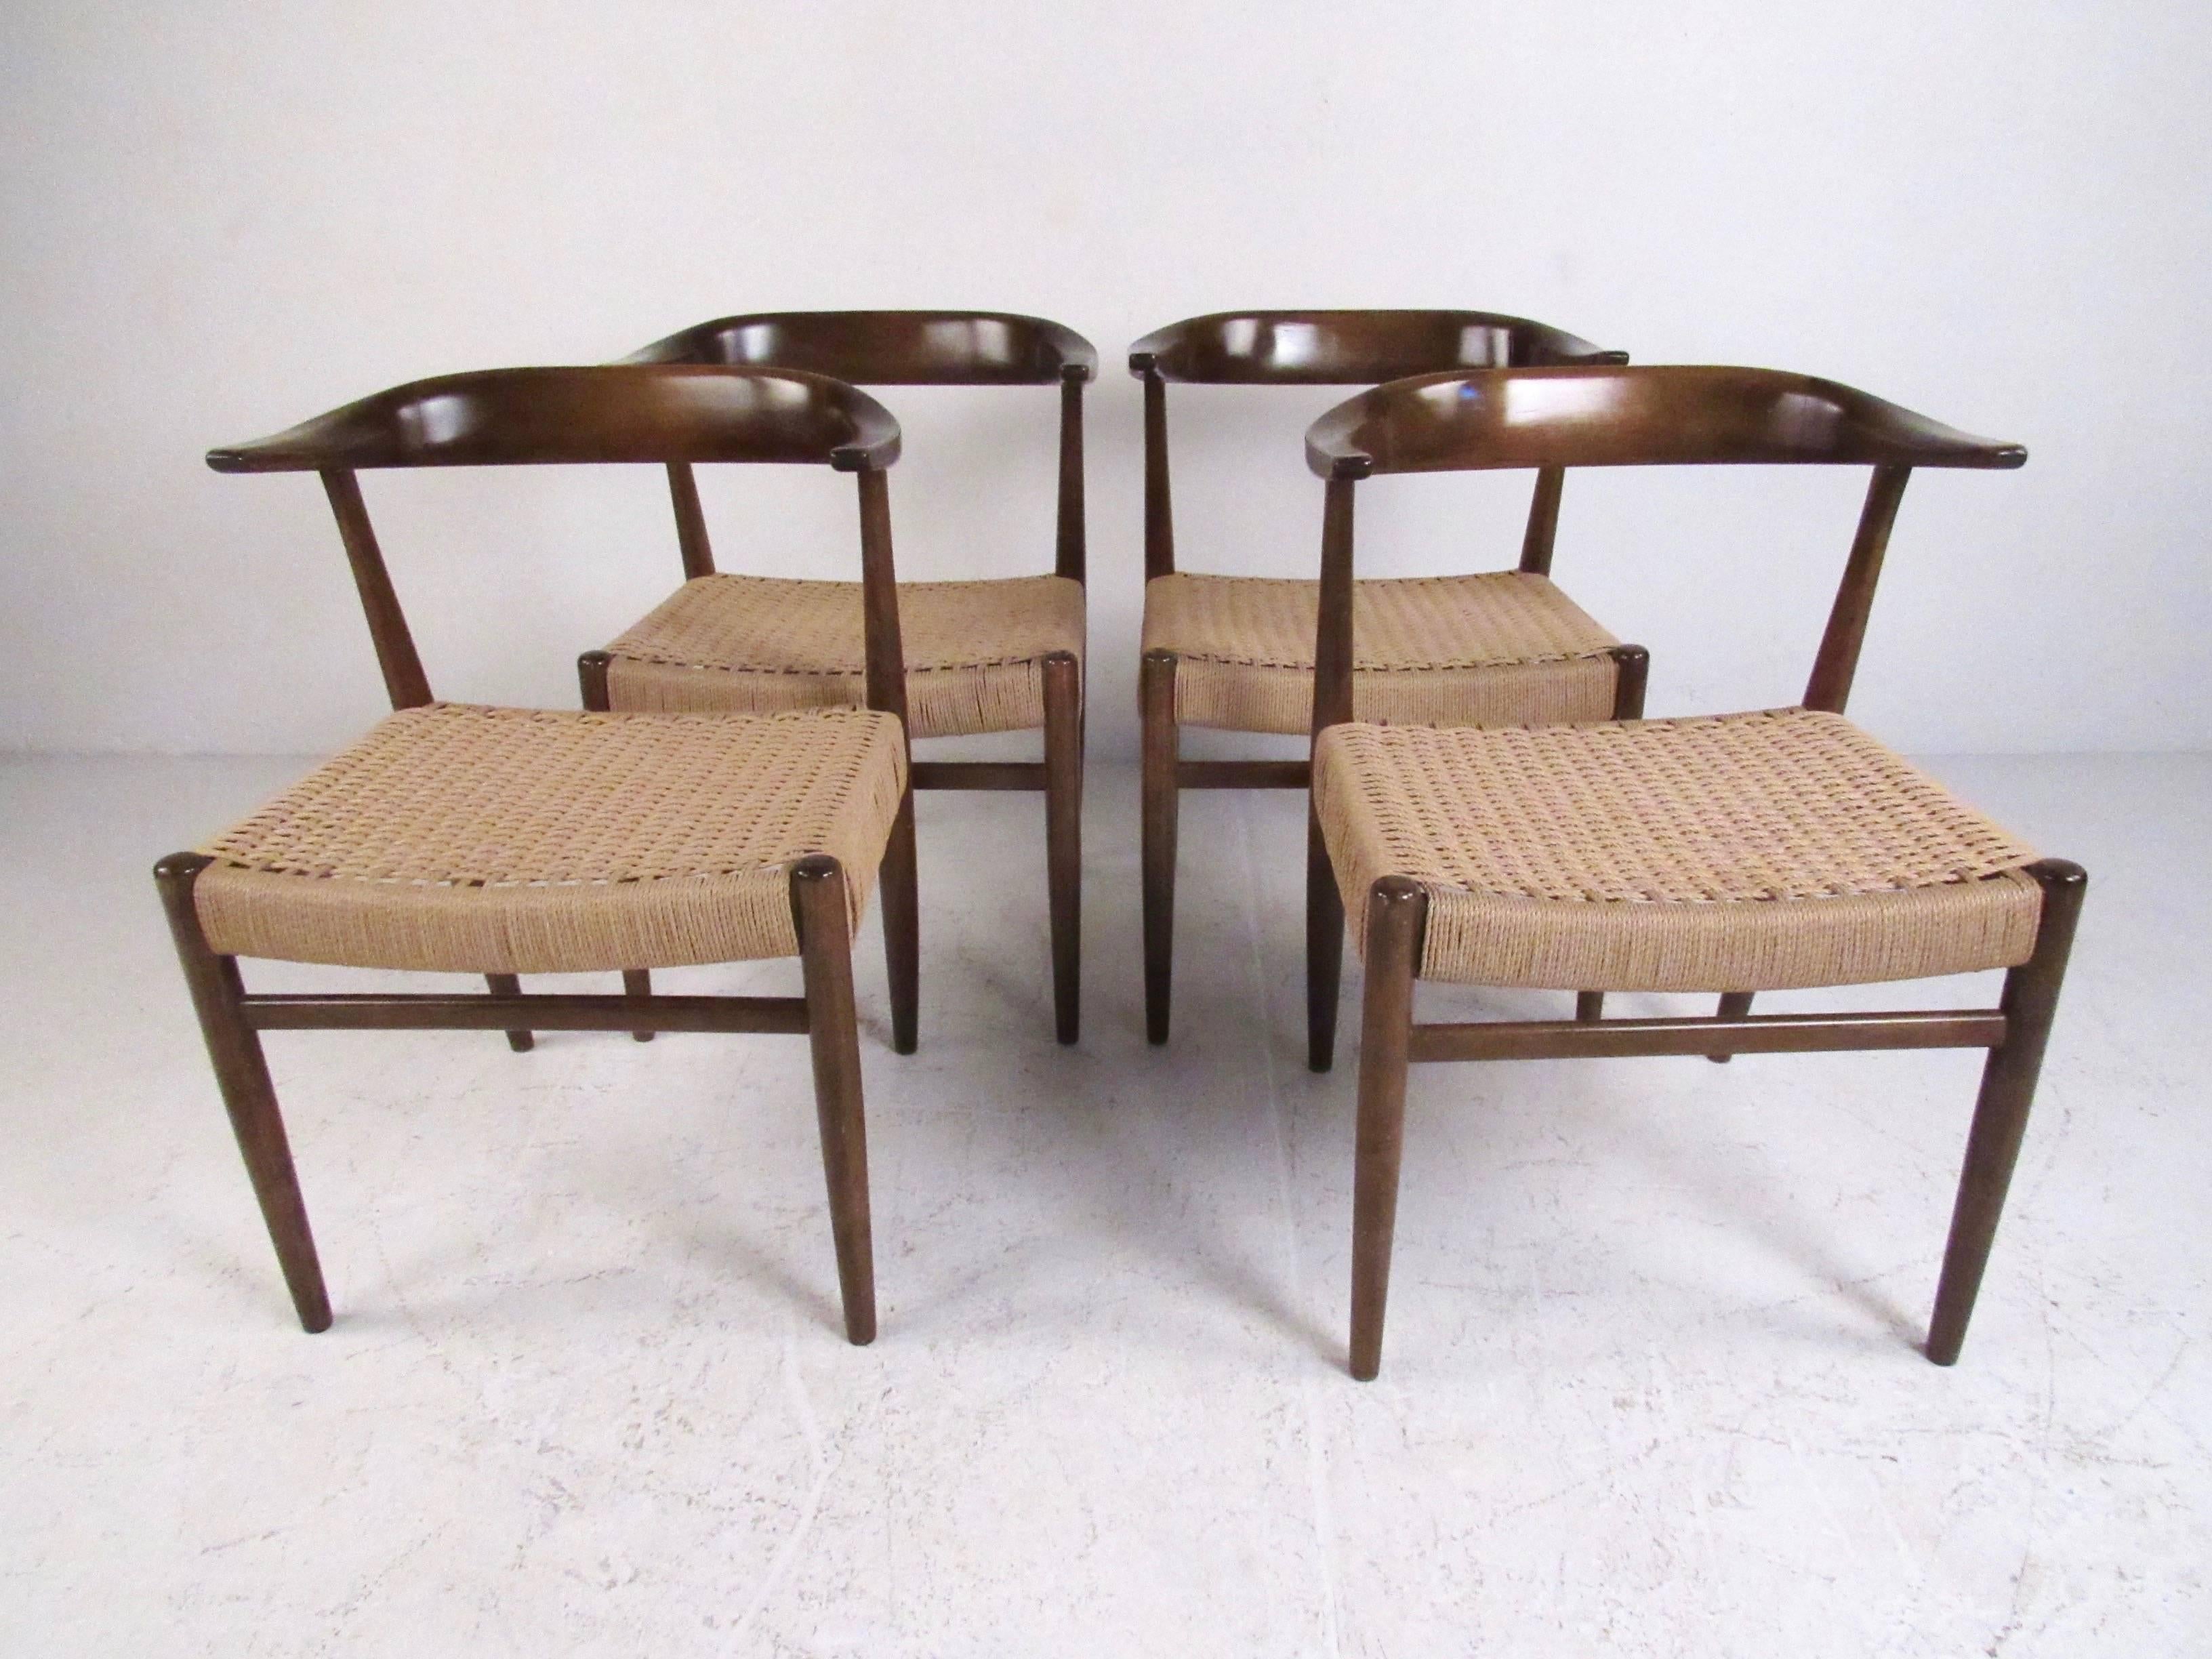 This stylish set of four Scandinavian style dining chairs feature sturdy Mid-Century construction, paper cord seats, and rounded Horn style seat backs. These unique chairs feature Hans Wegner style design including sculpted seat back and tapered